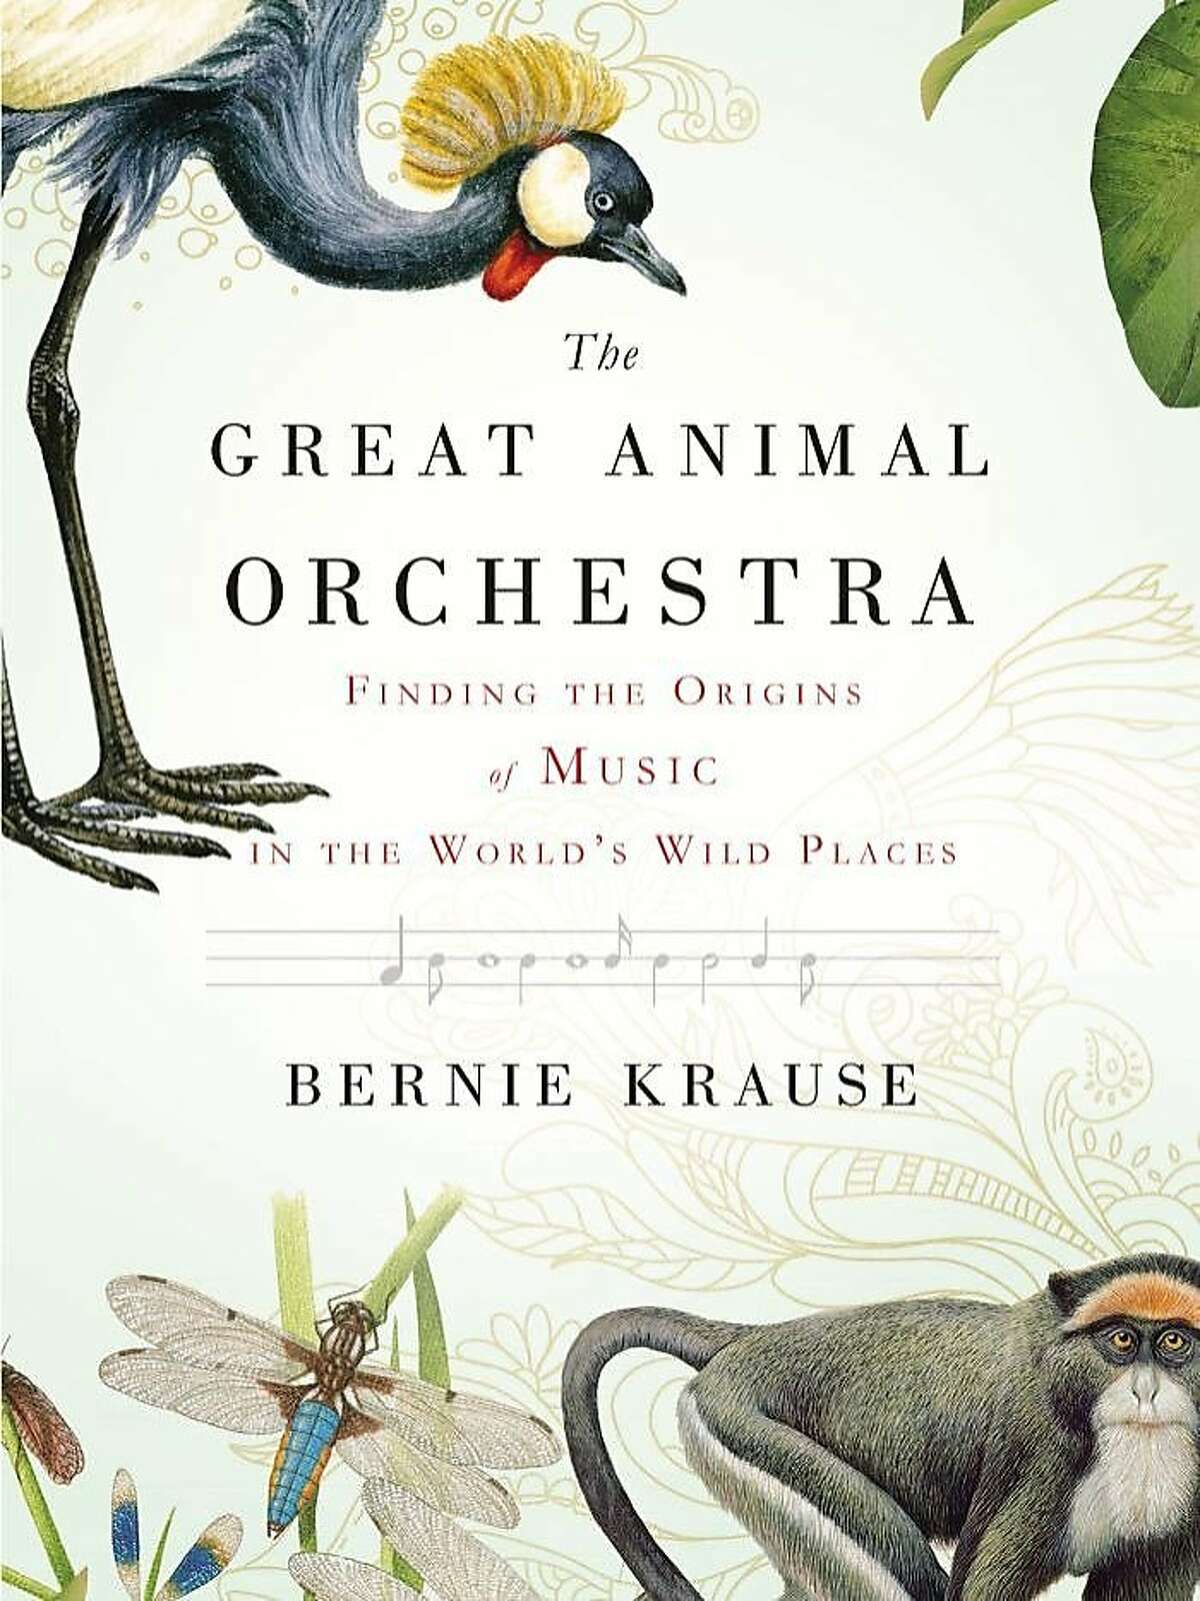 The Great Animal Orchestra: Finding the Origins of Music in the World's Wild Places, by Bernie Krause